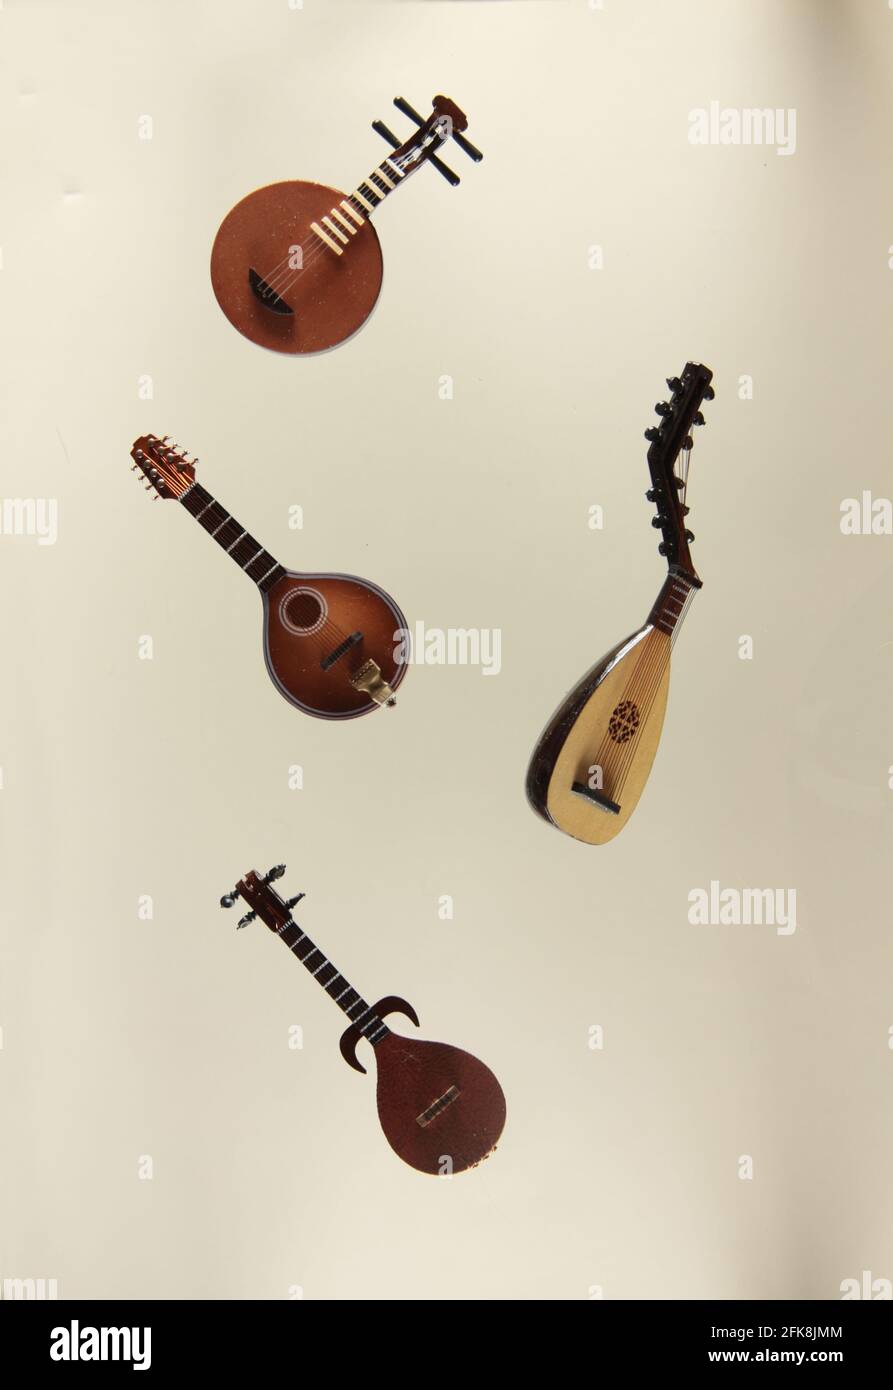 String instruments - rebab, theorbo, yueqin and mandoline isolated against light background. Image contains copy space Stock Photo